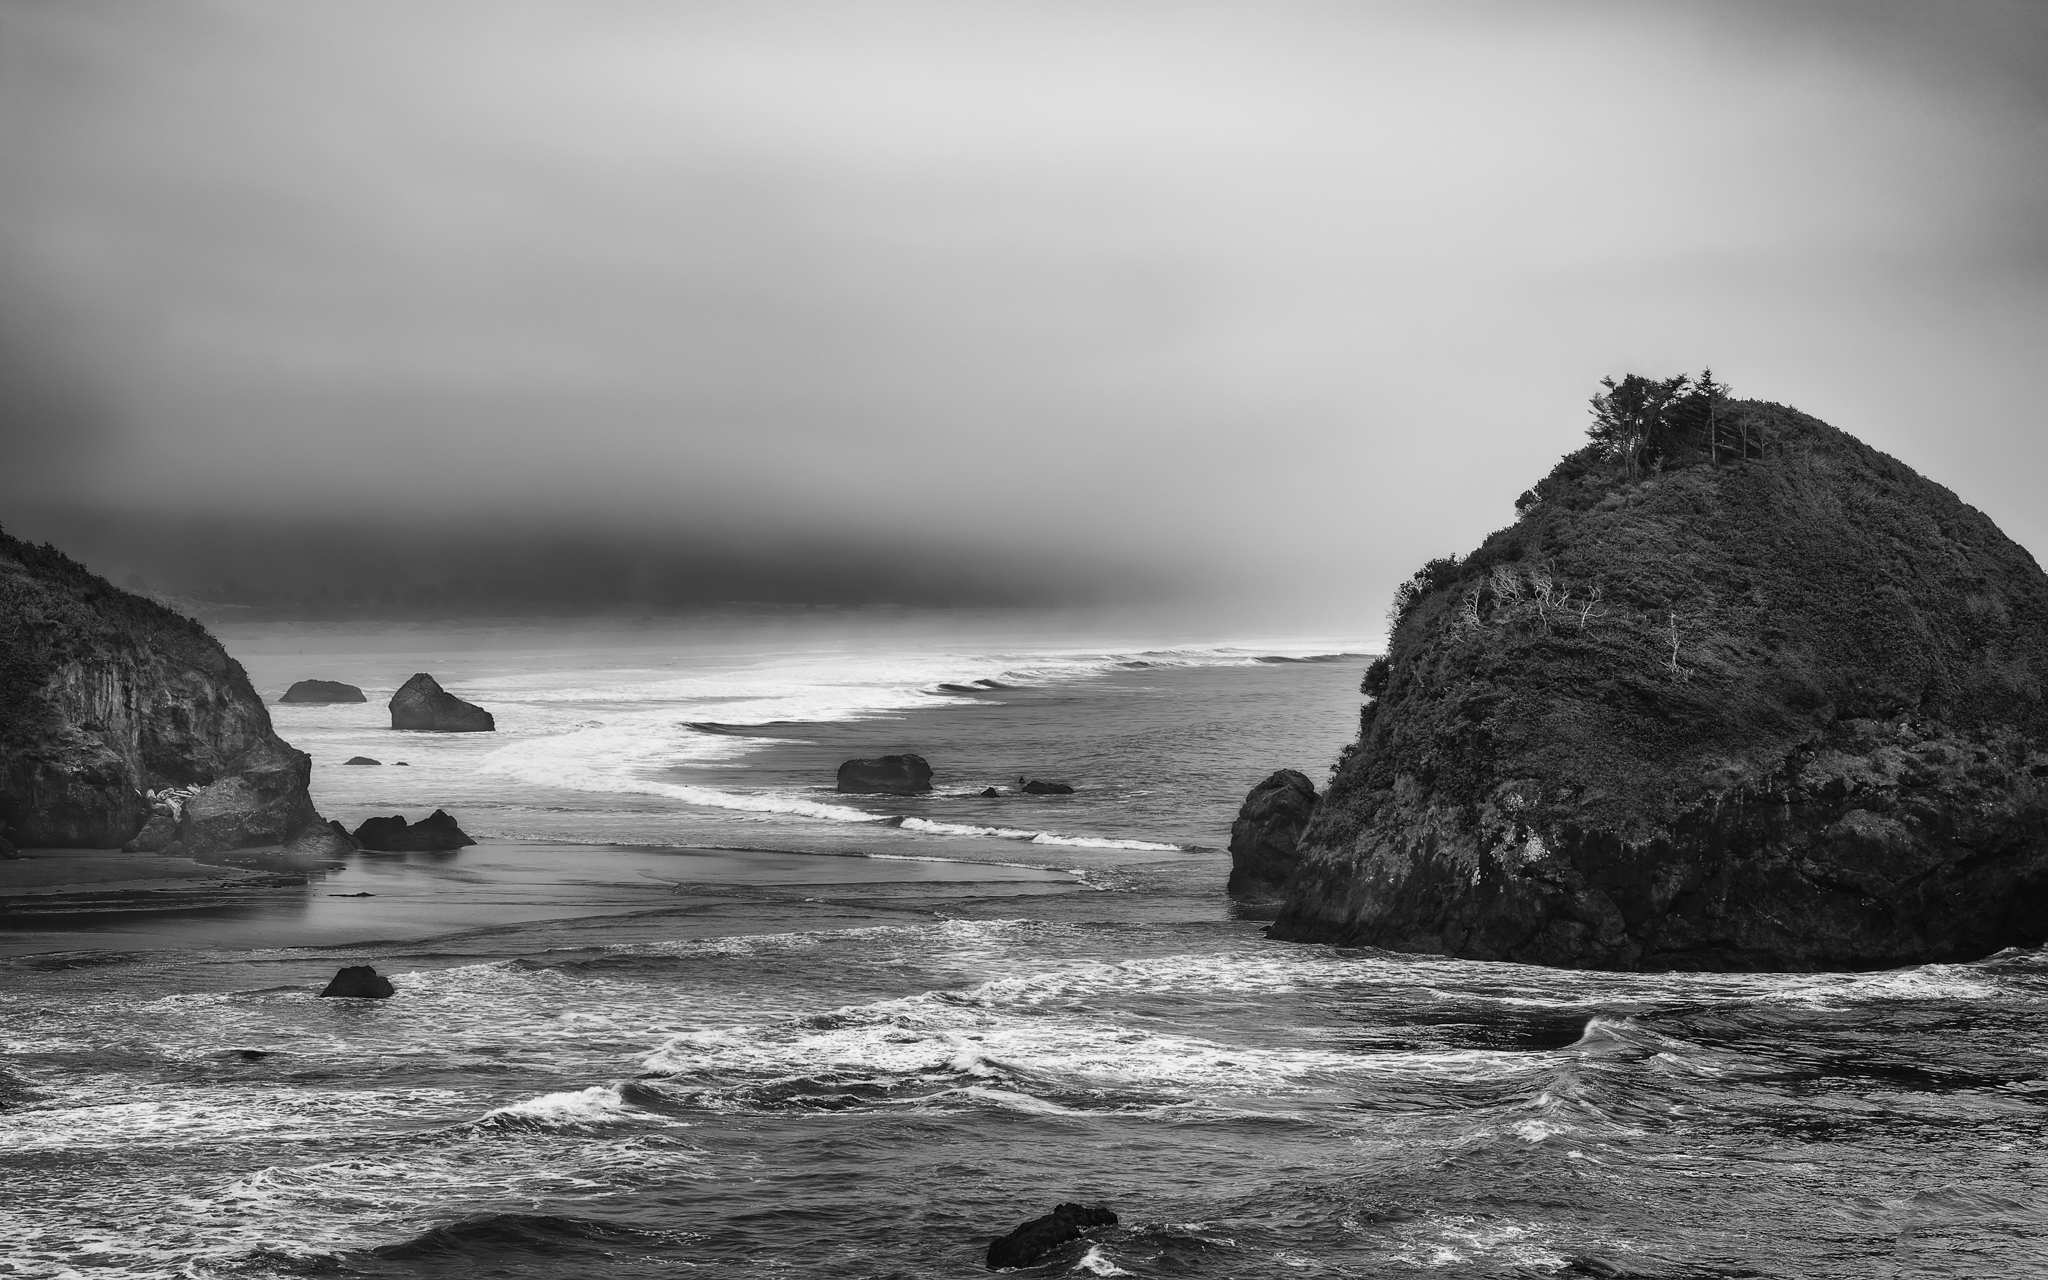 Photographing on the northern California Coast was difficult when I was there due to smoke from all the fires. I love fog, but not so much smoke. This day was a combination of both and I found black & white was the perfect rendering of the silence of this morning.